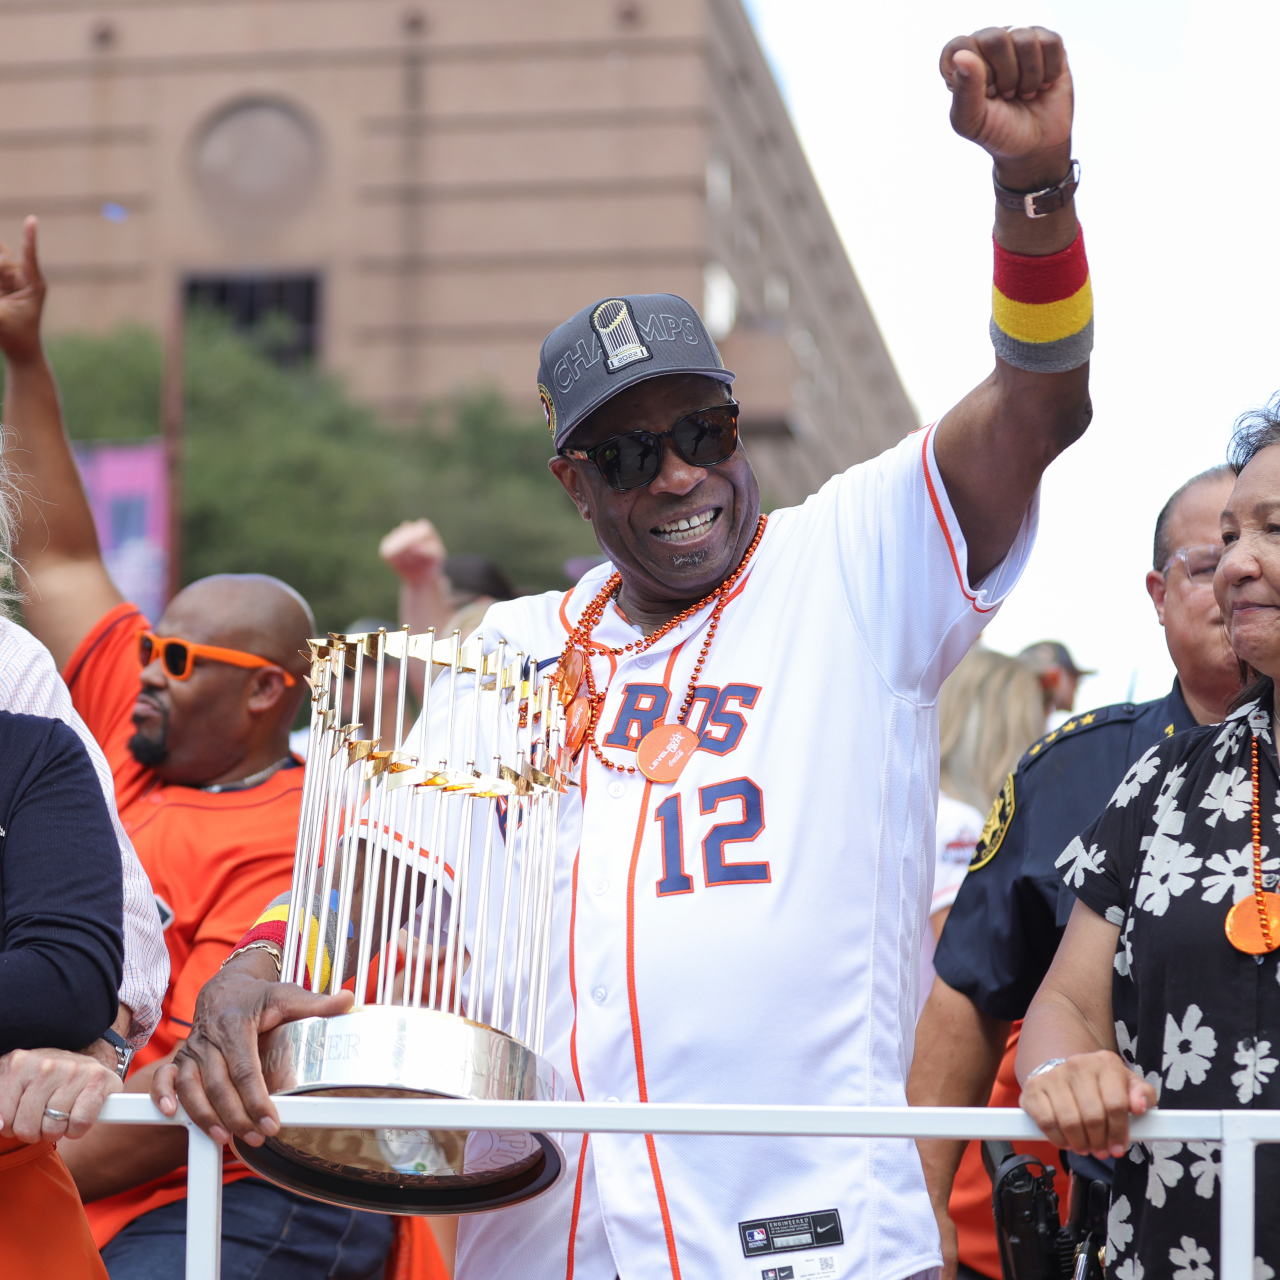 Astros manager Dusty Baker to return after winning World Series title - CGTN